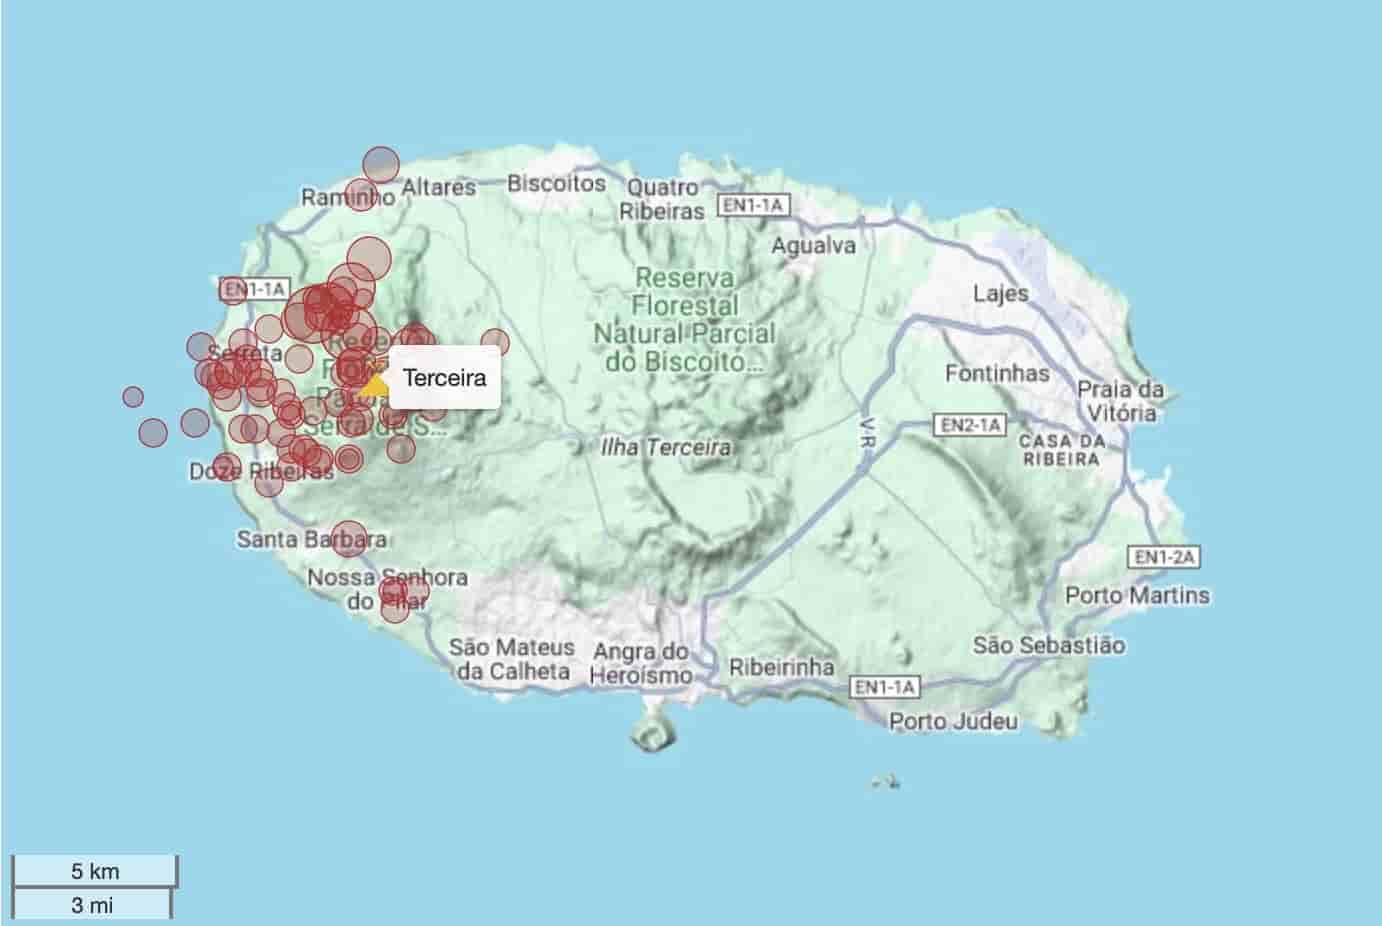 Recent earthquakes under Terceira island (past 30 days), clustering under the Santa Barbara volcano